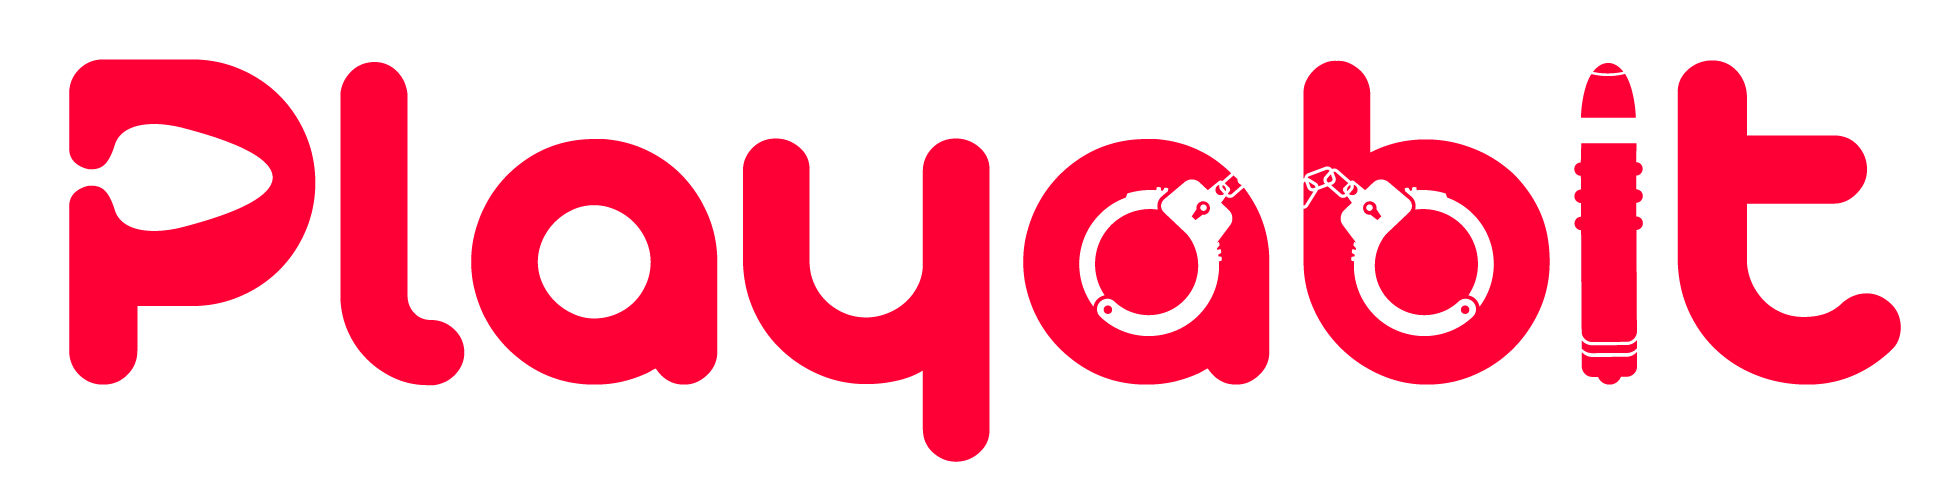 197-logo-red-png.png